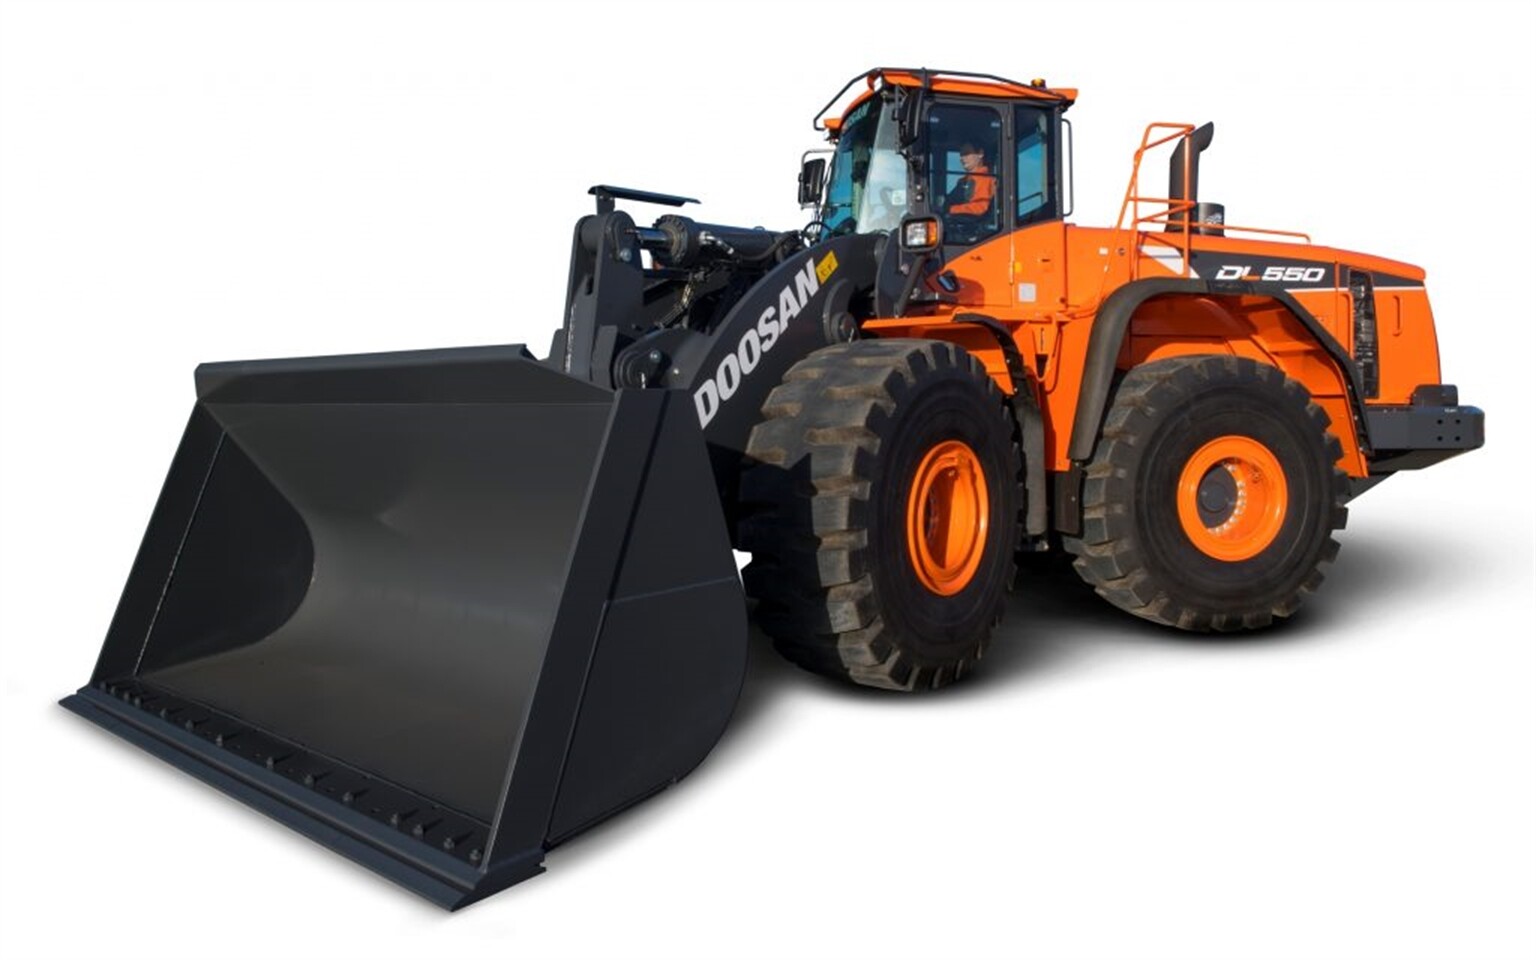 New Seoul Ltd Business Formed to Handle Doosan National Account Customers in Quarrying and Waste in the UK